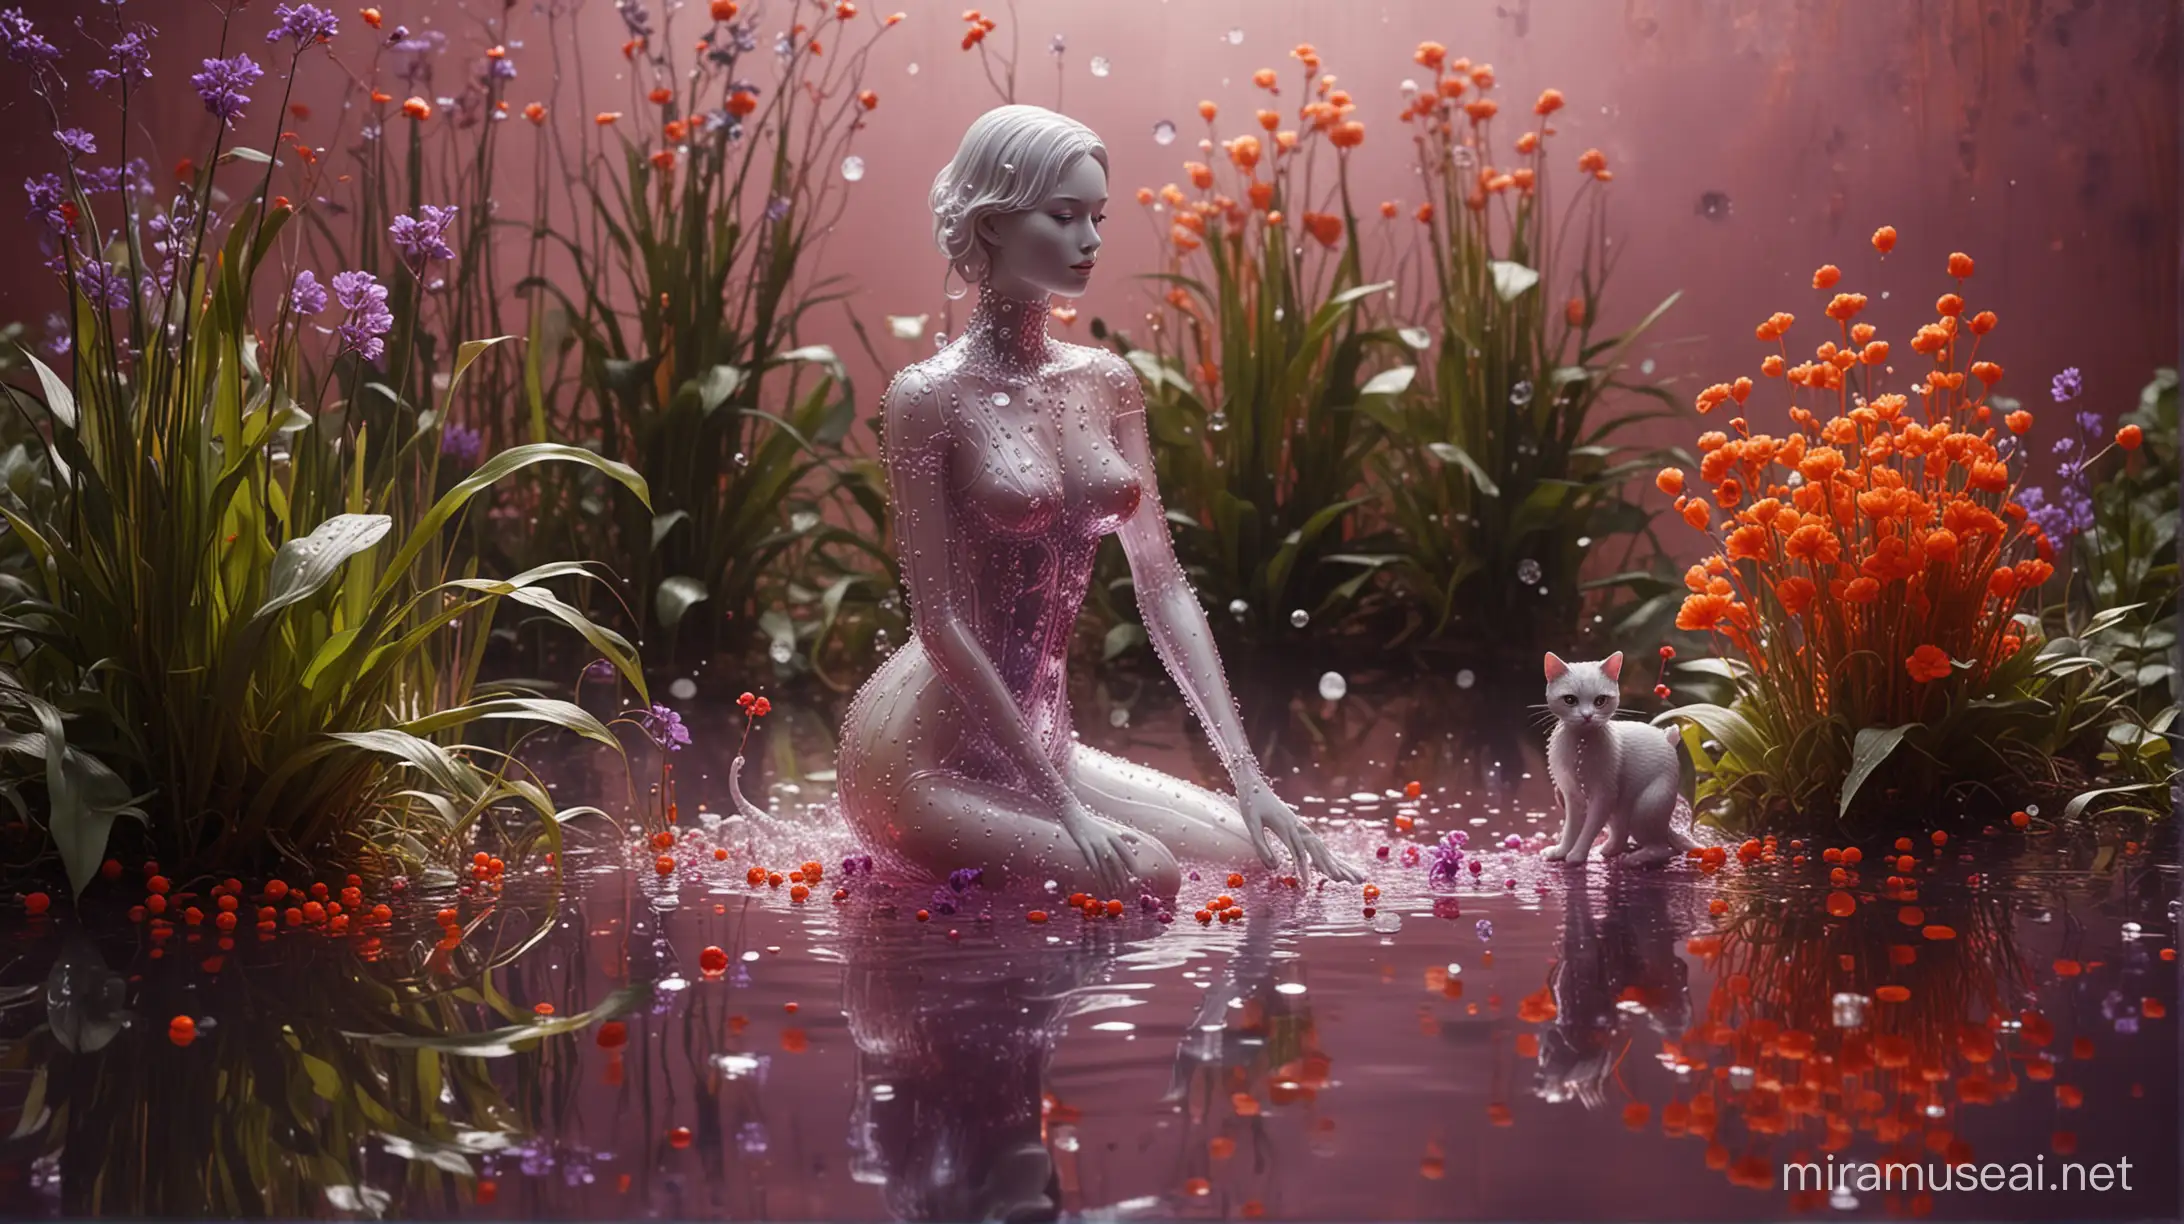 A human glass mannequin, transparent, sat in the water, with water plants and flowers, with silver dots and small shapes, next to a glass cat, red small dots, watering her plants, with furry violet and orange, abstract liquid melt background, high fashion, vintage photography, cinematic, soft fur